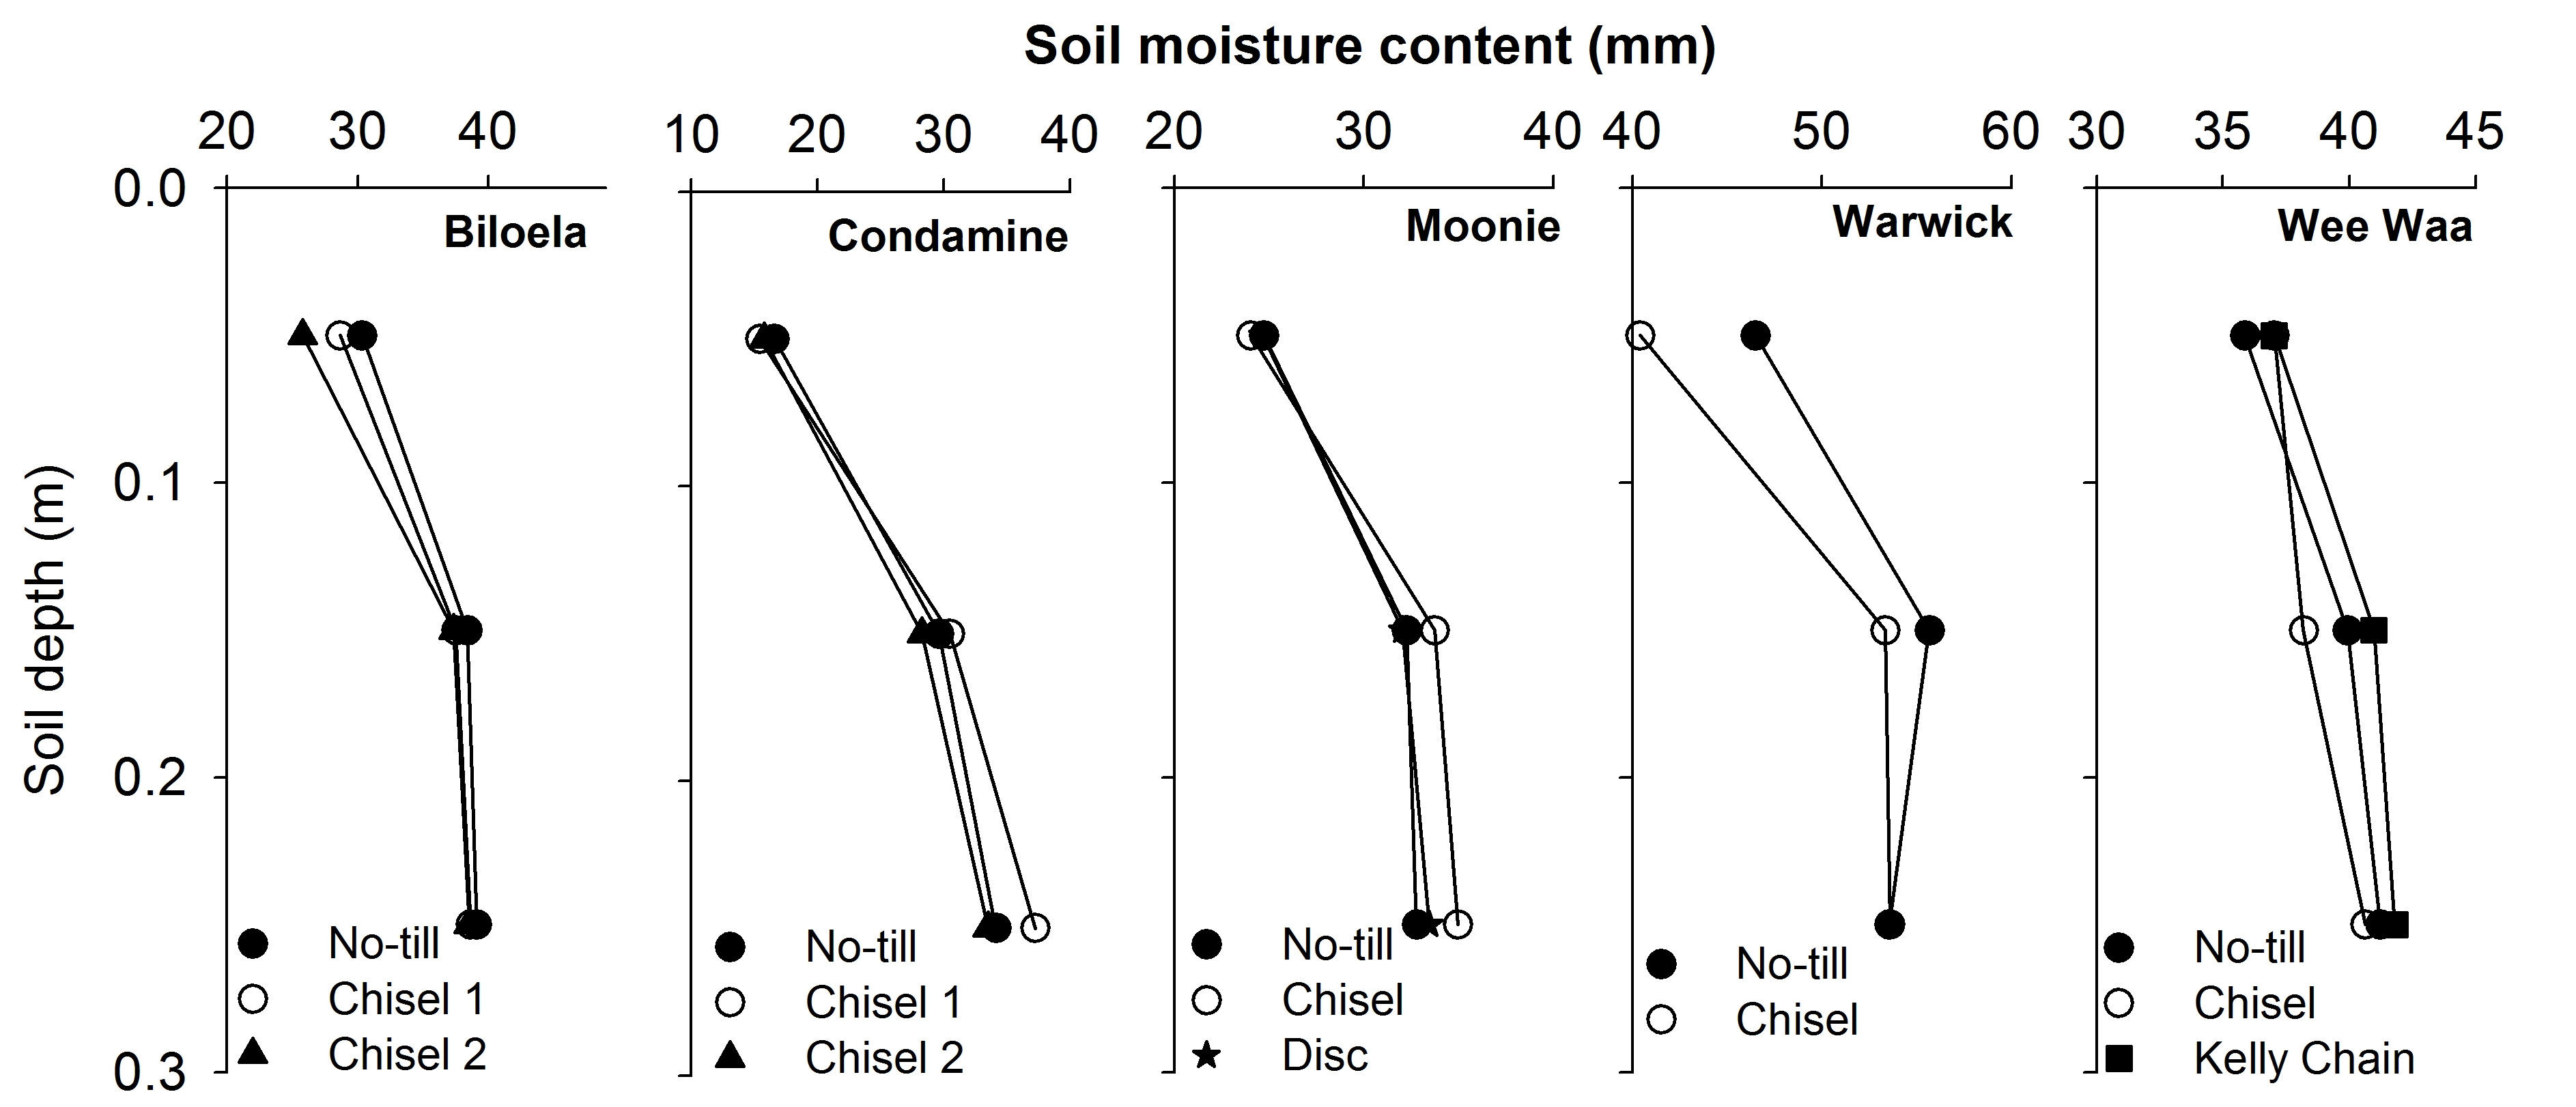 5 line graphs showing the soil moisture content of different farming systems in different locations